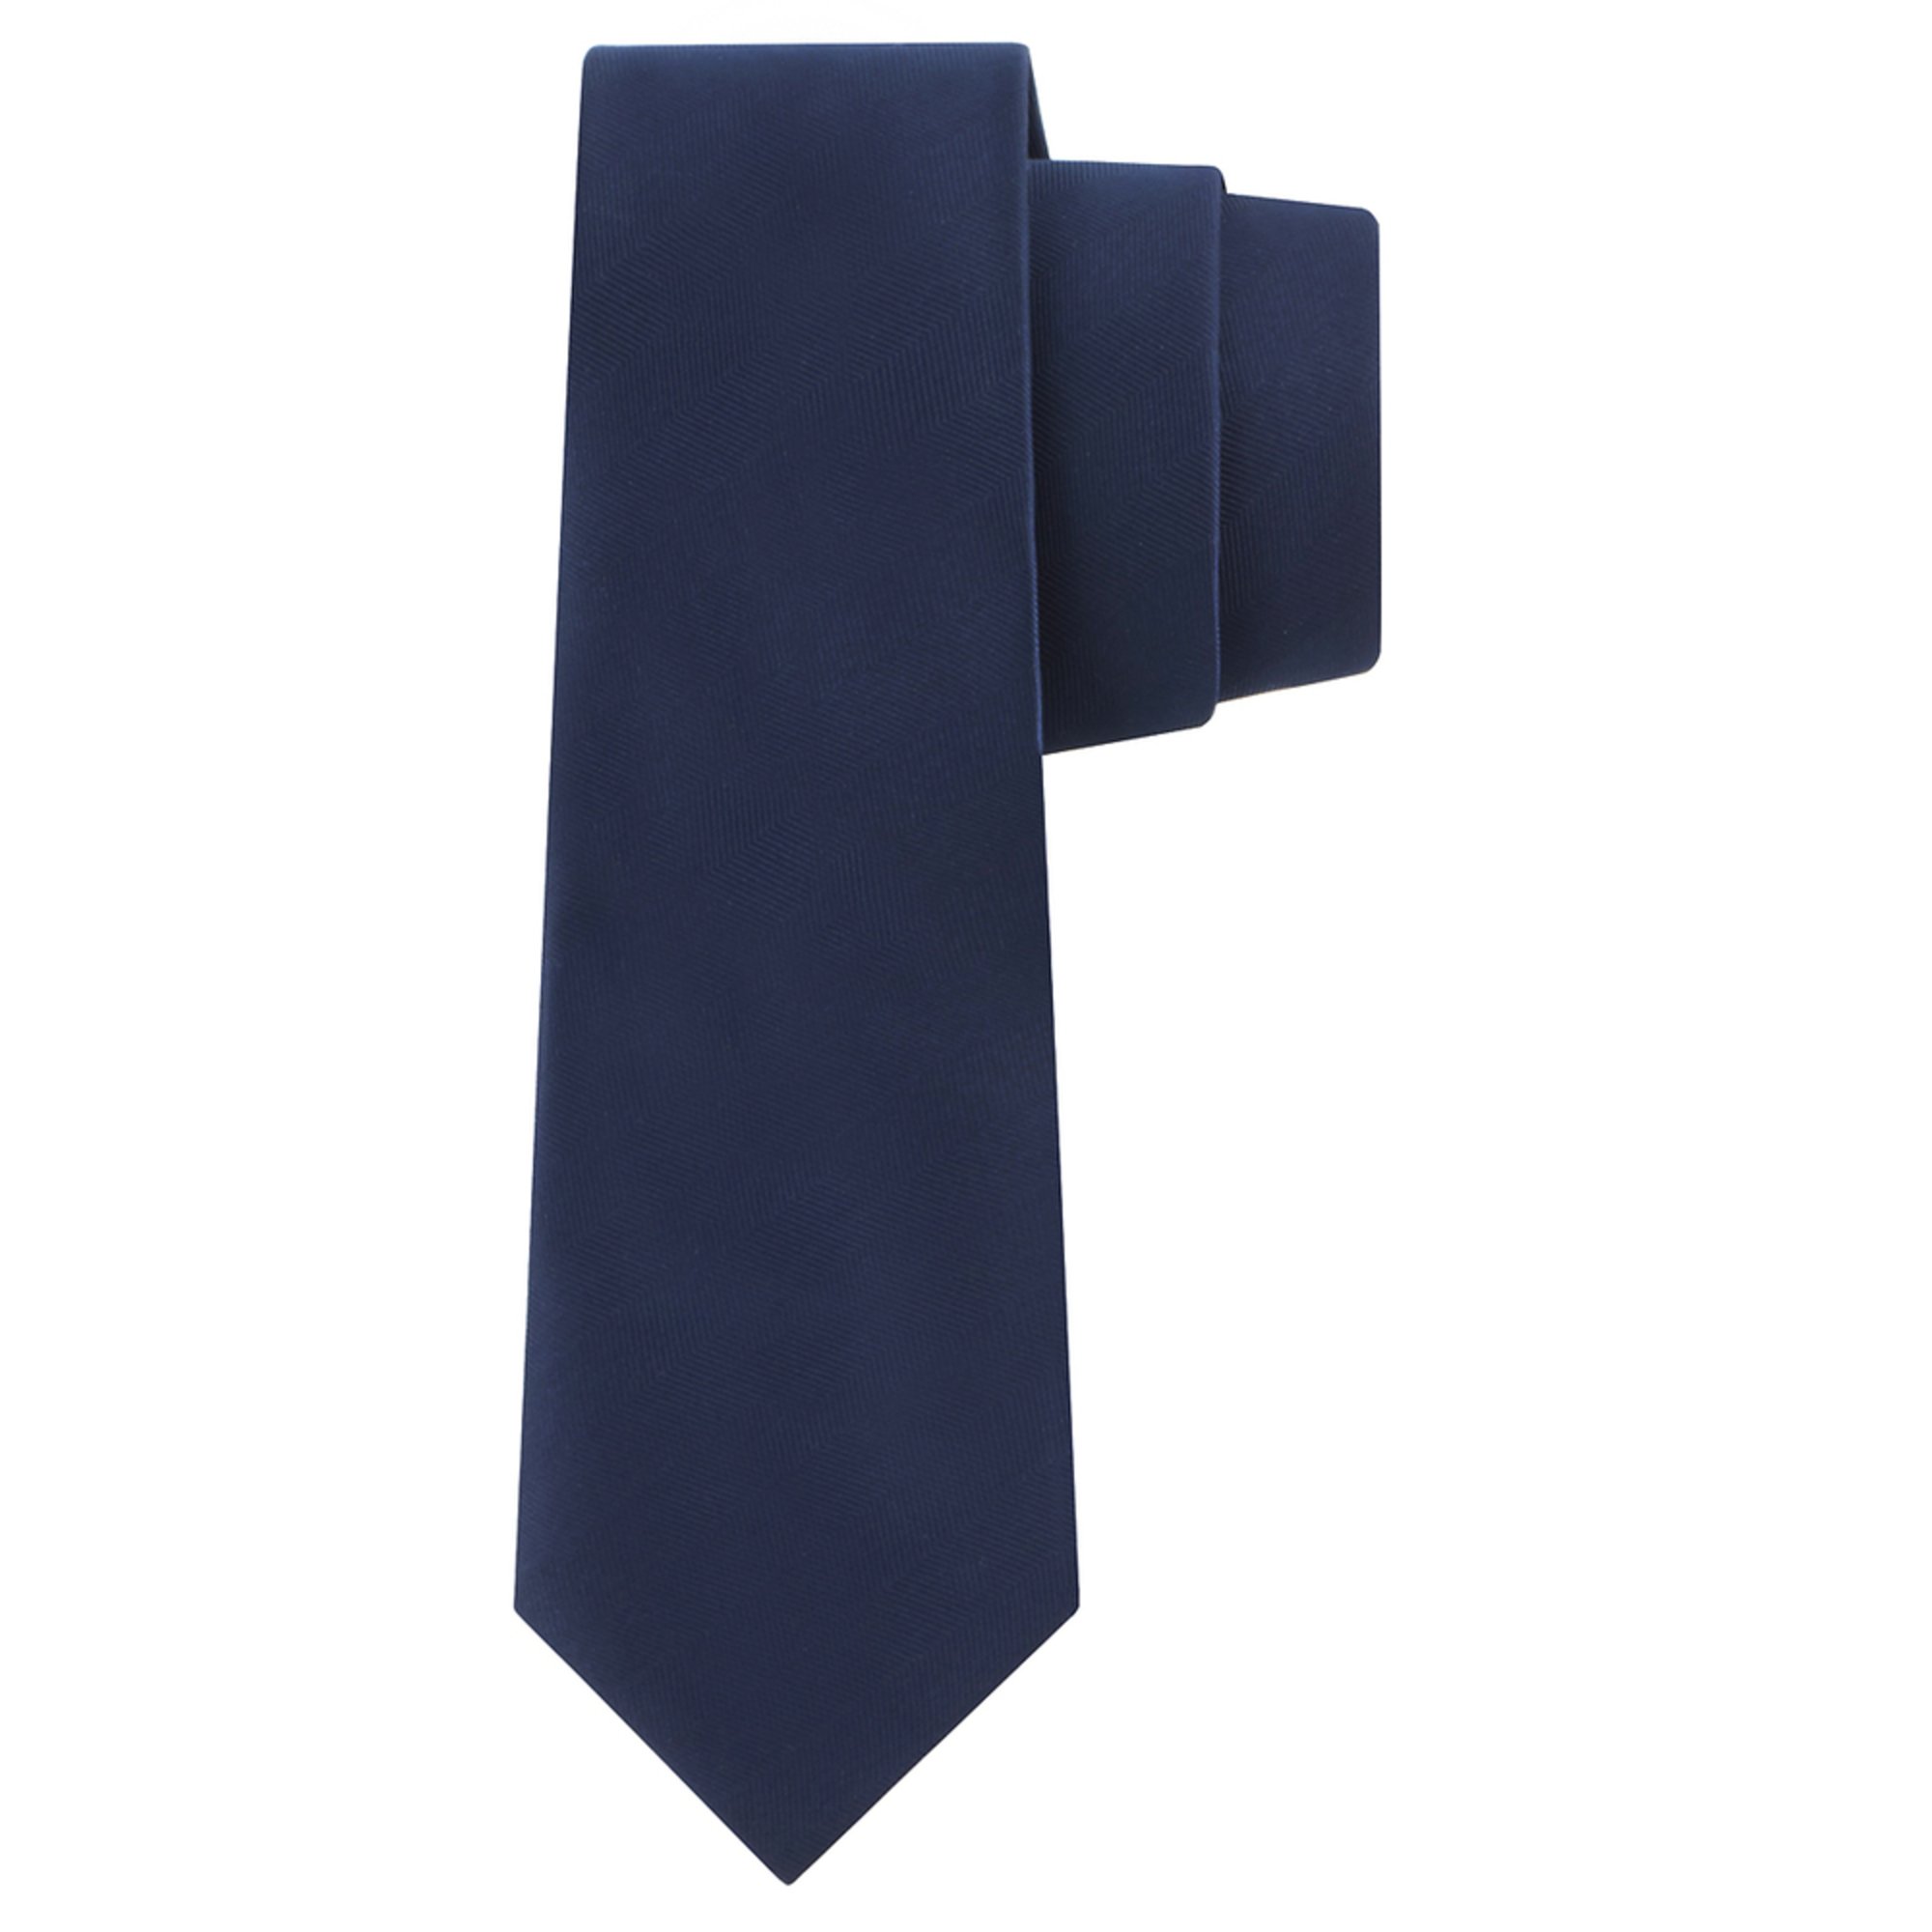 Usaf Necktie P/w | Air Force | Military - Shop Your Navy Exchange ...